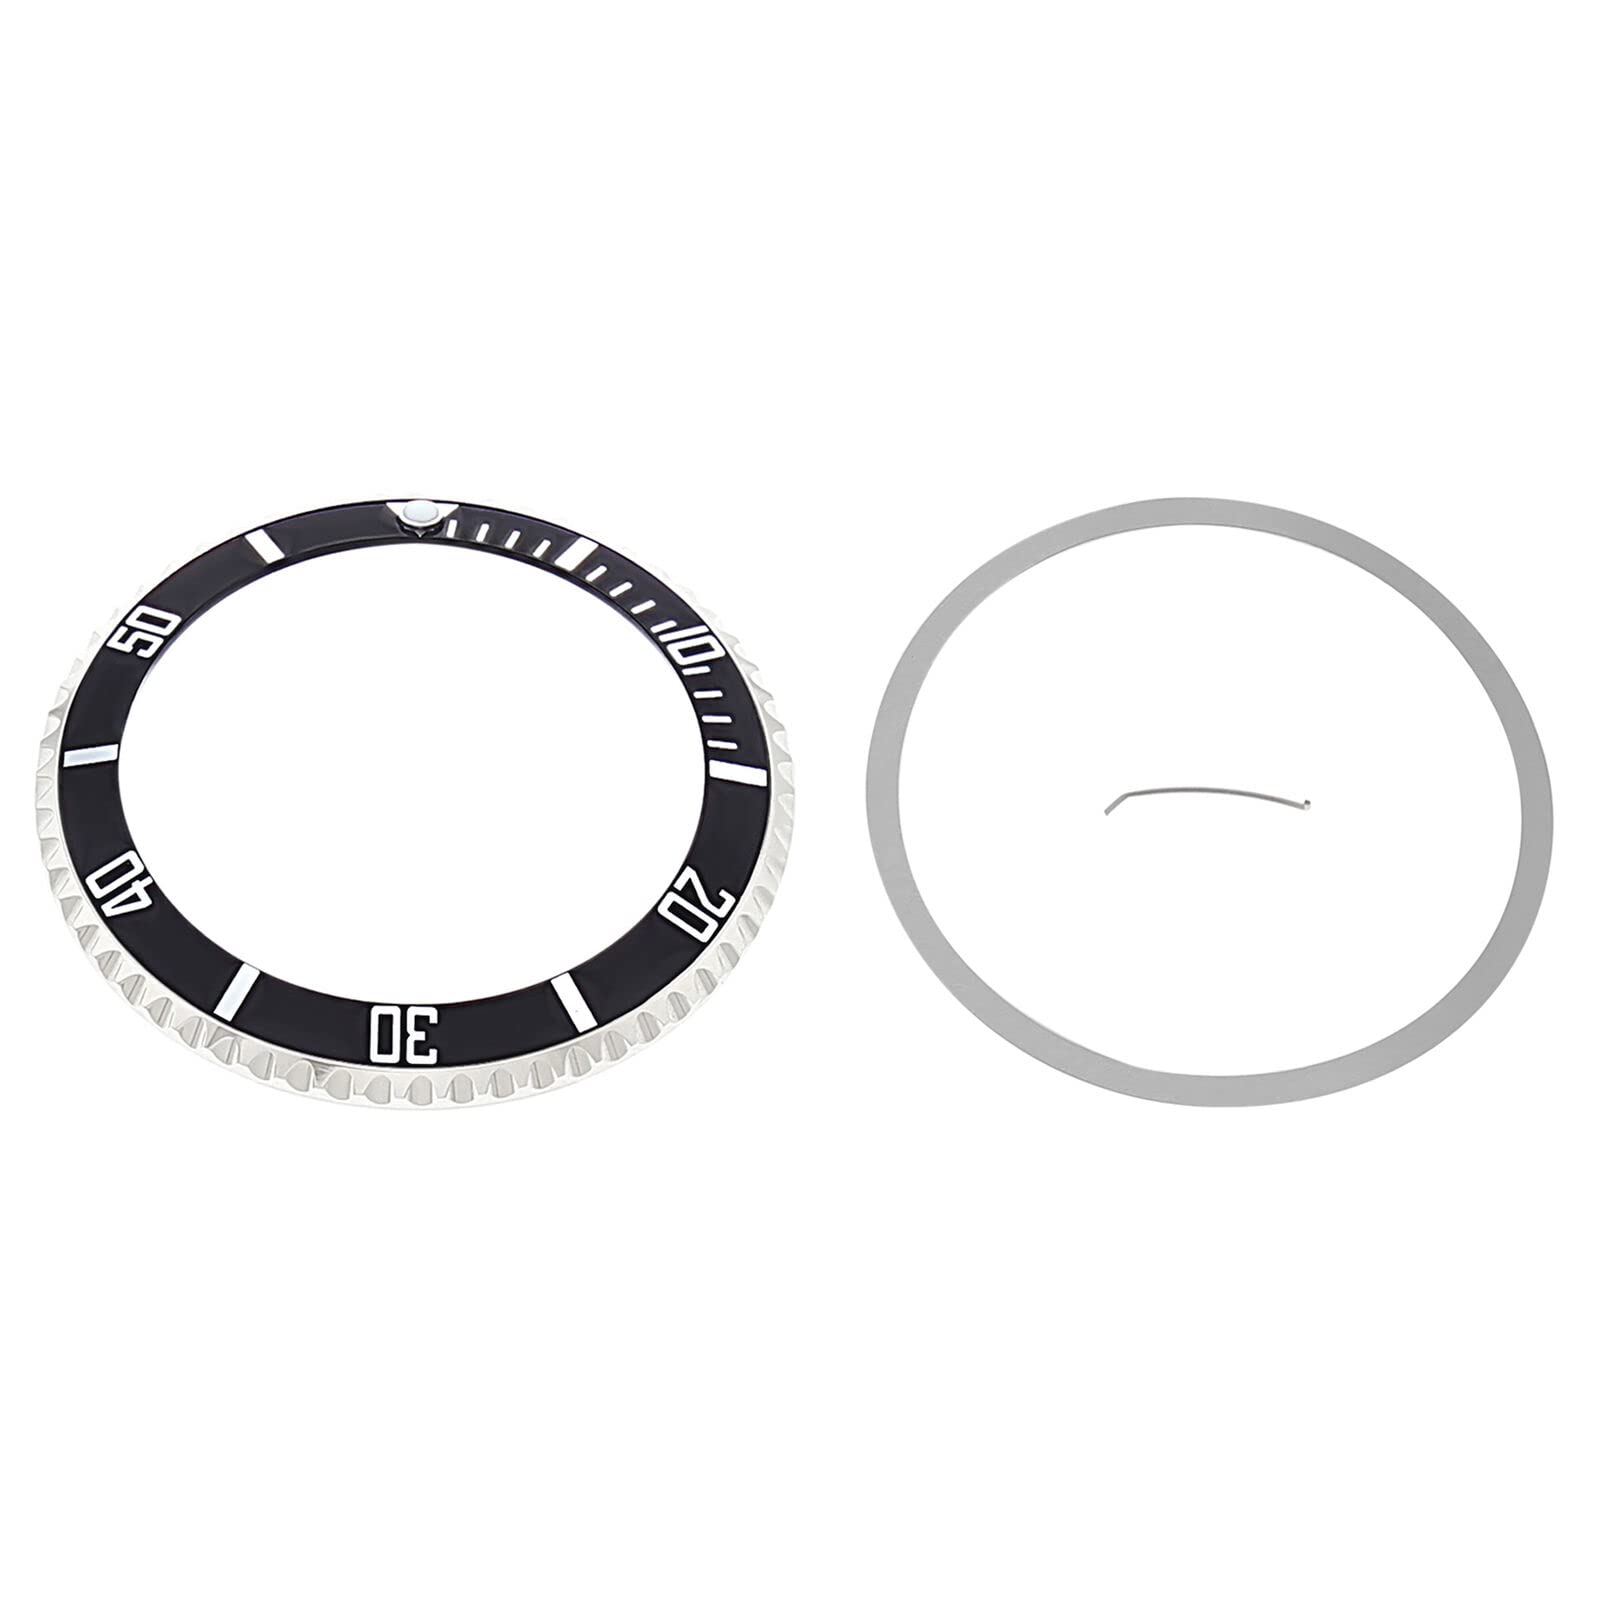 Ewatchparts BEZEL & INSERT COMPLETE COMPATIBLE WITH ROLEX SUBMARINER 16610 CIRCA 2000 16800 16808